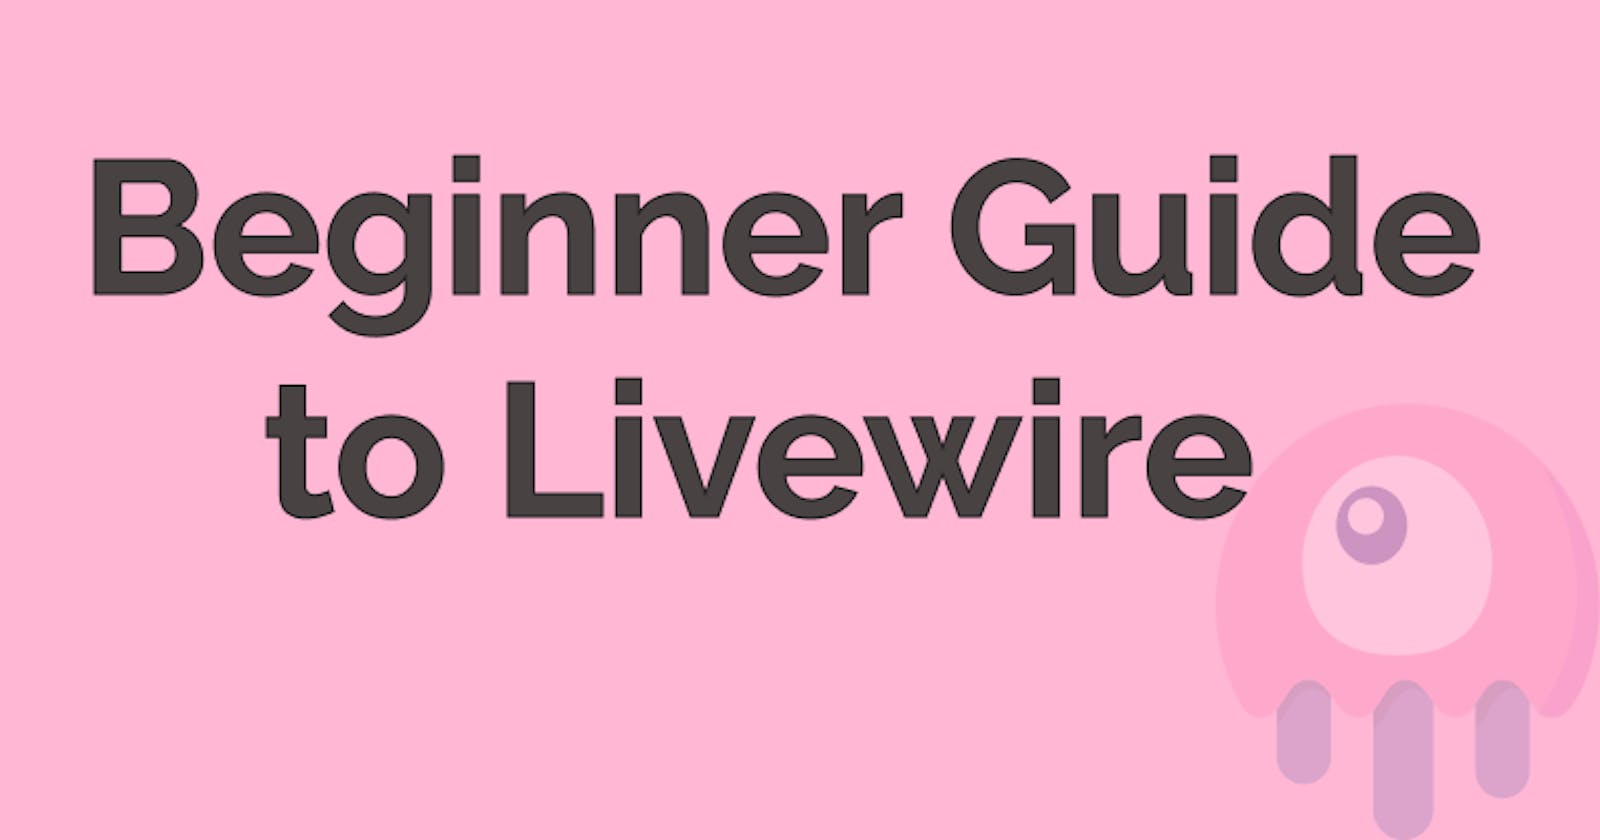 A Beginner Guide to Laravel Livewire & How it Works